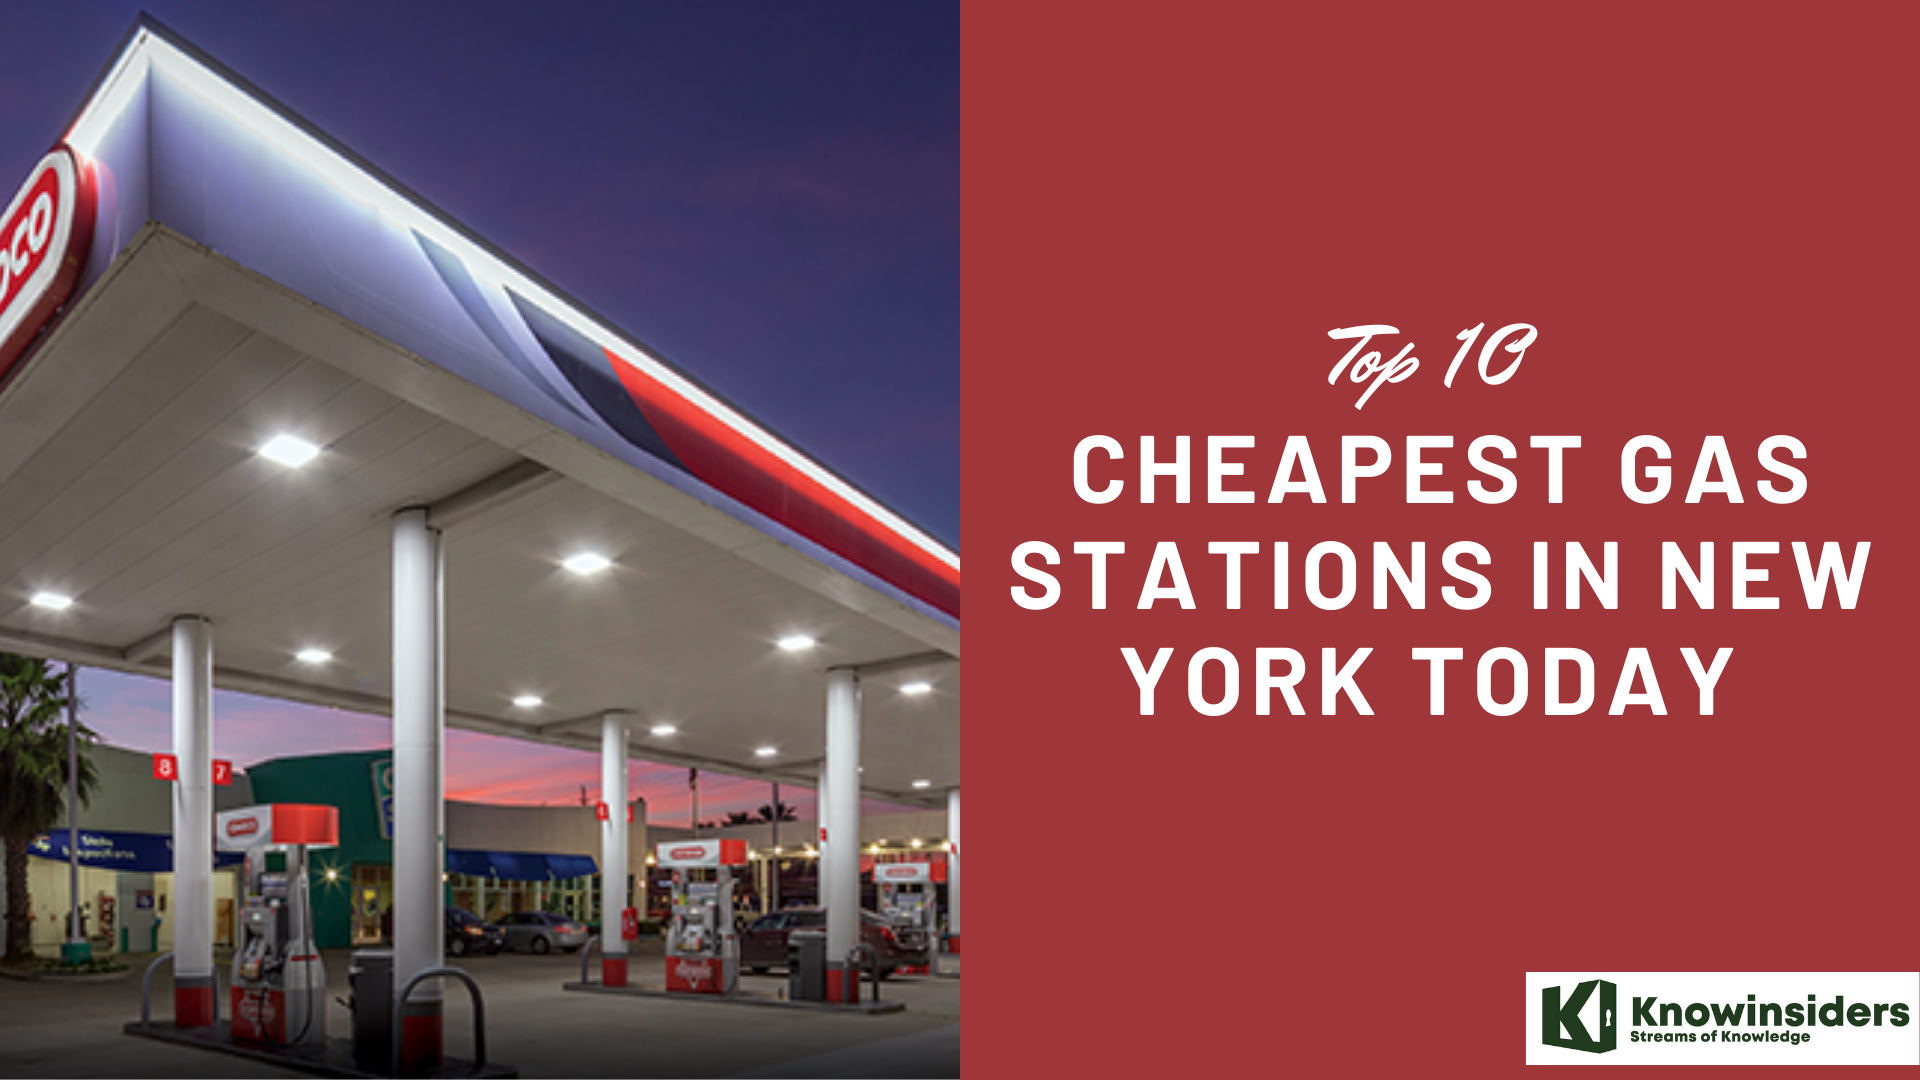 Top 10 Cheapest Gas Stations In New York Today